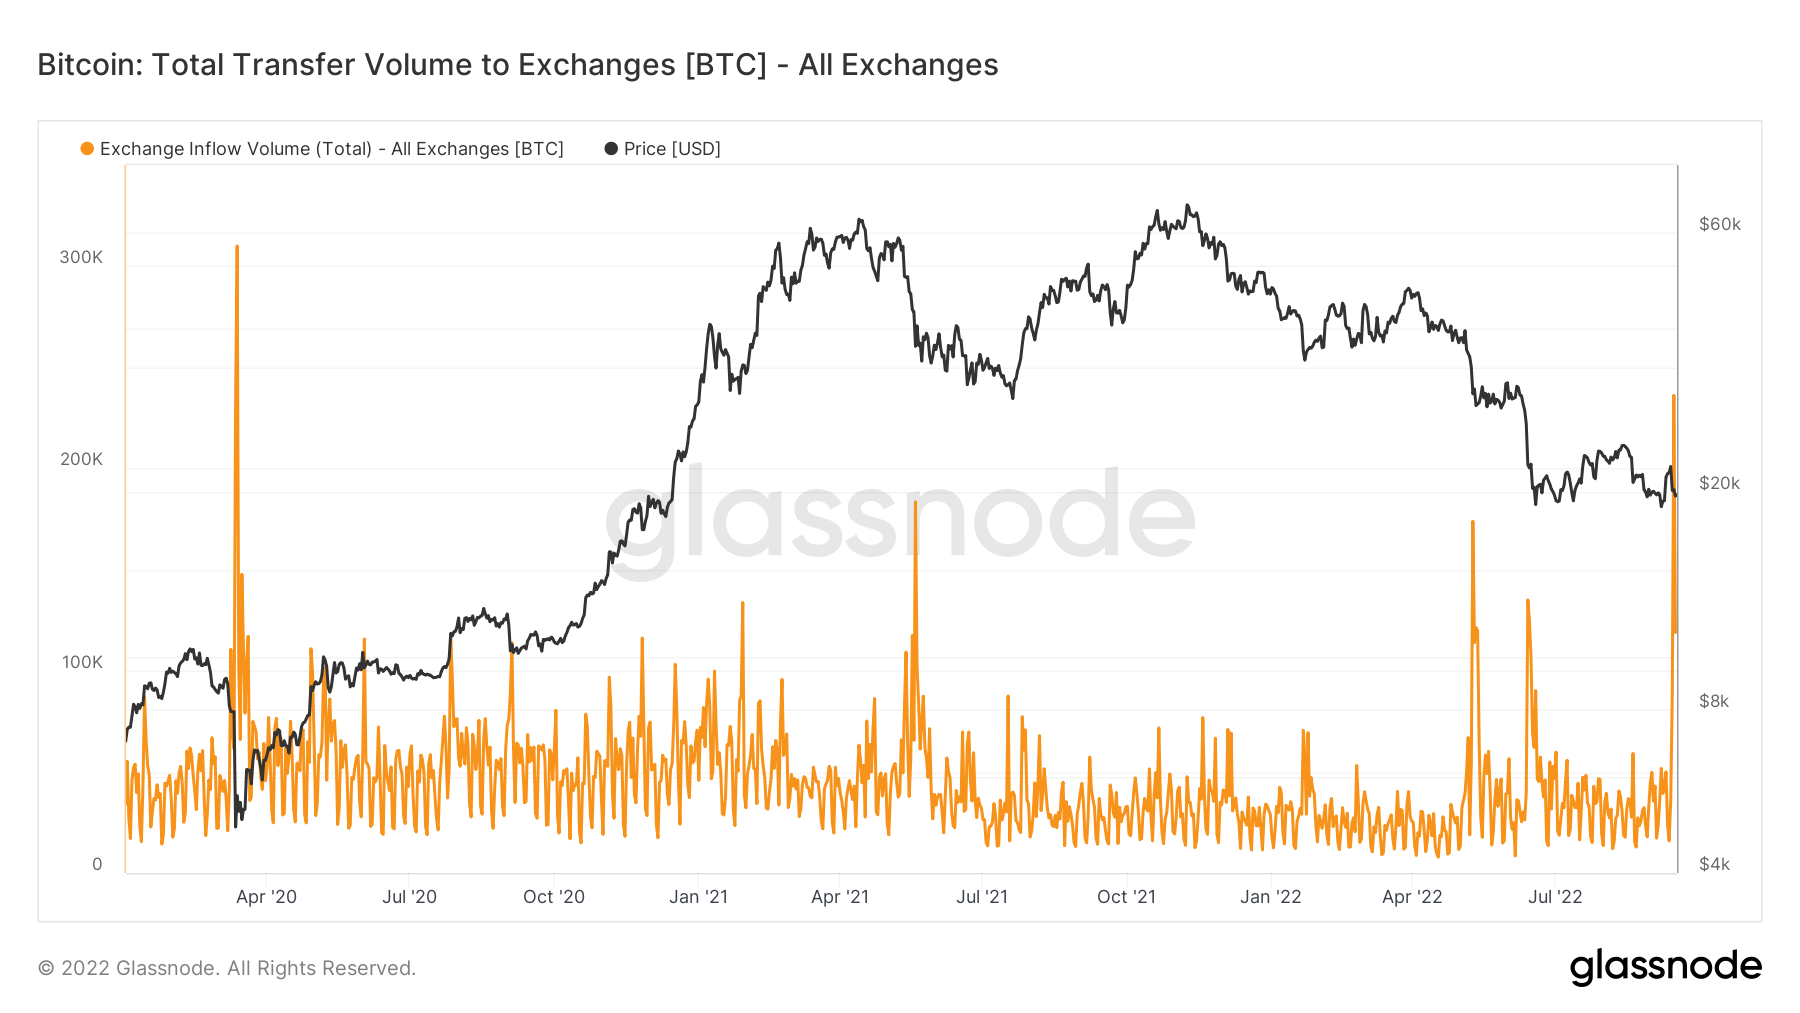 Bitcoin total transfer volume to exchanges chart. Source: Glassnode